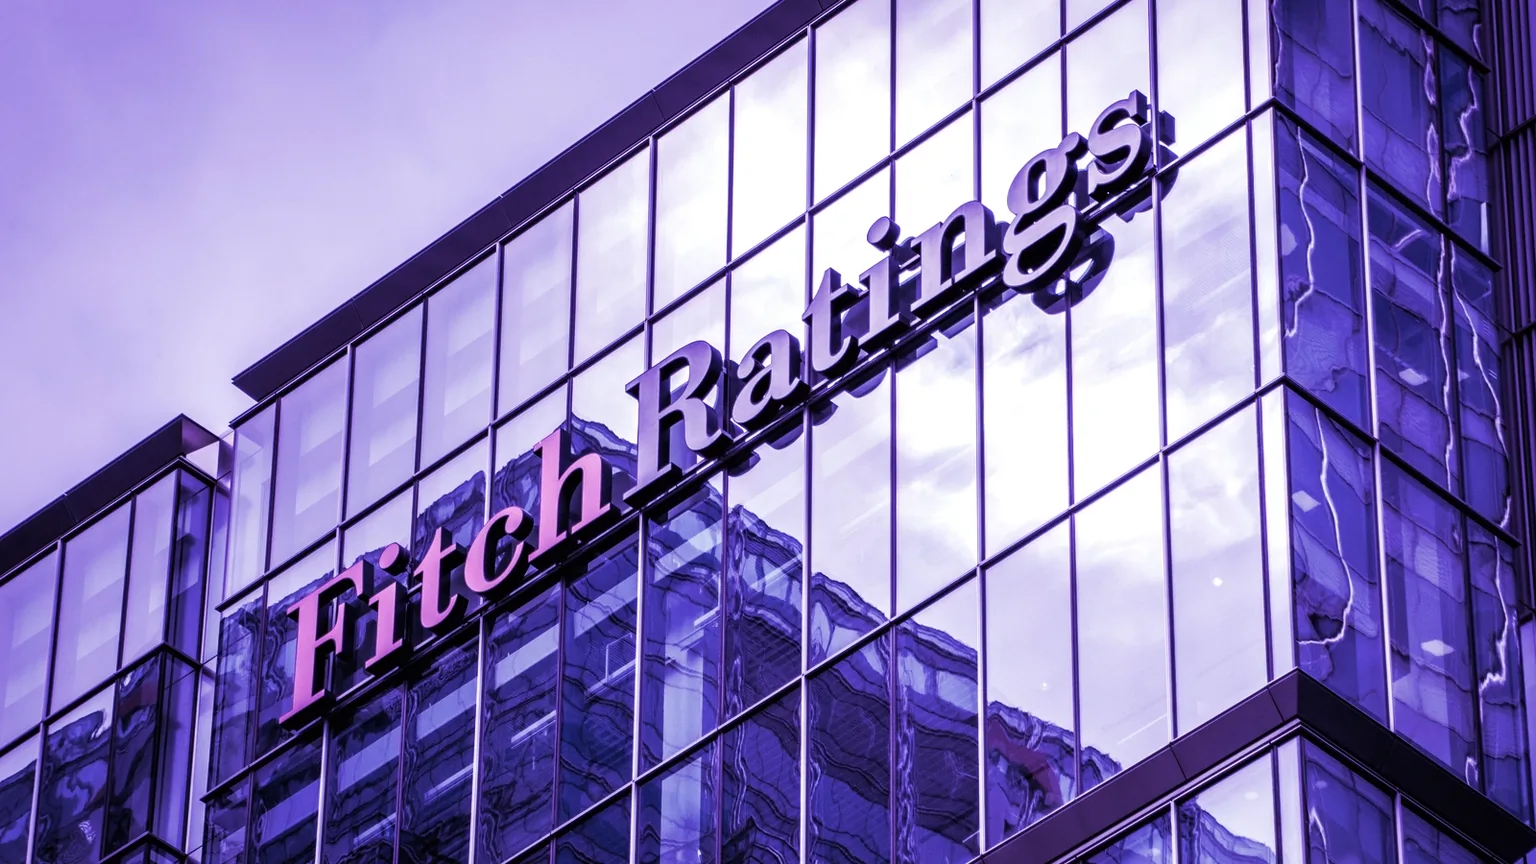 Fitch Ratings. Image: Shutterstock